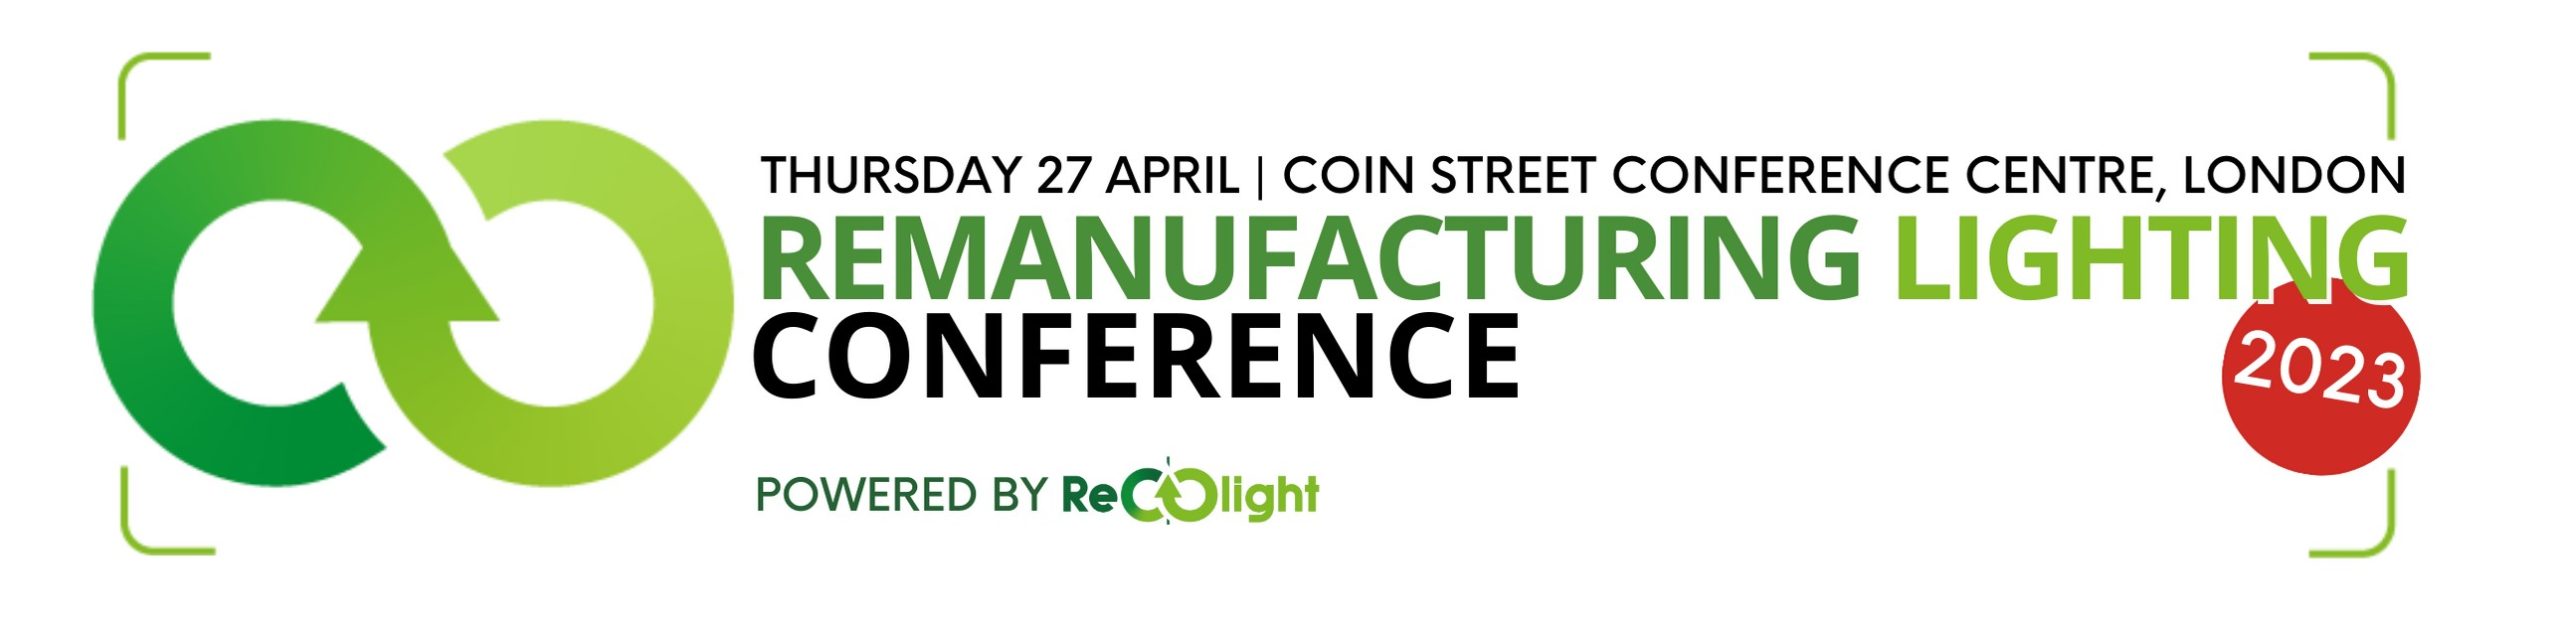 Remanufacturing Lighting Conference Recolight PRESS RELEASE logo